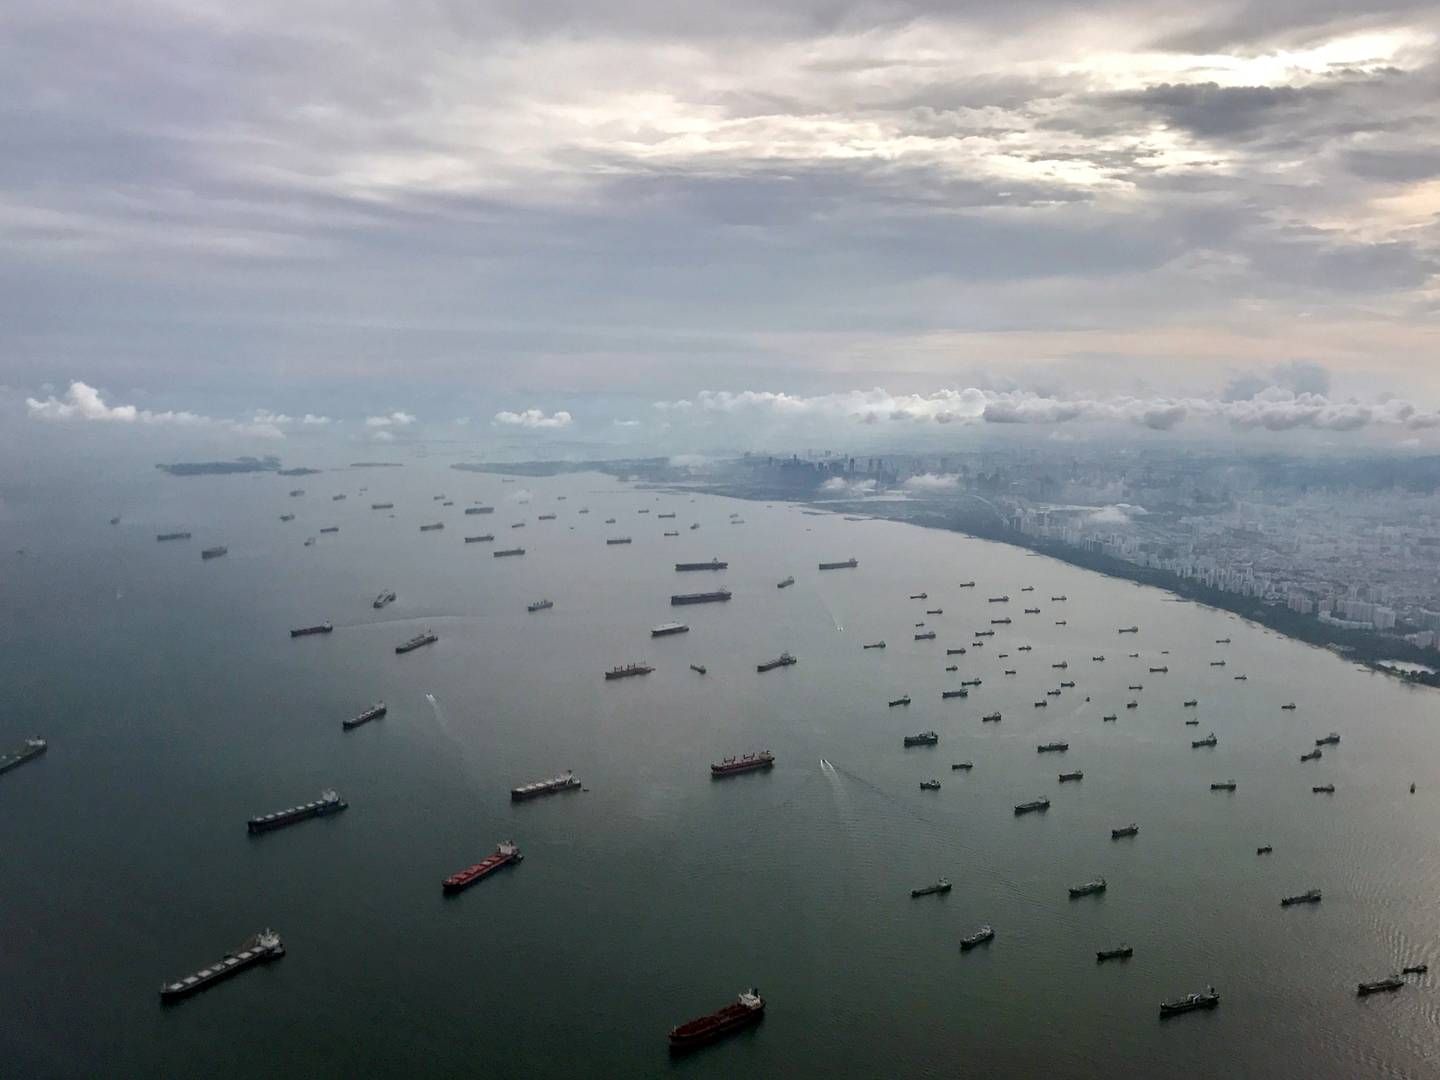 More than 1,000 ships pass through the waters of the Port of Singapore daily and is the busiest transhipment hub for the container market with a throughput of 39 million teu containers last year. | Foto: Jorge Silva/Reuters/Ritzau Scanpix